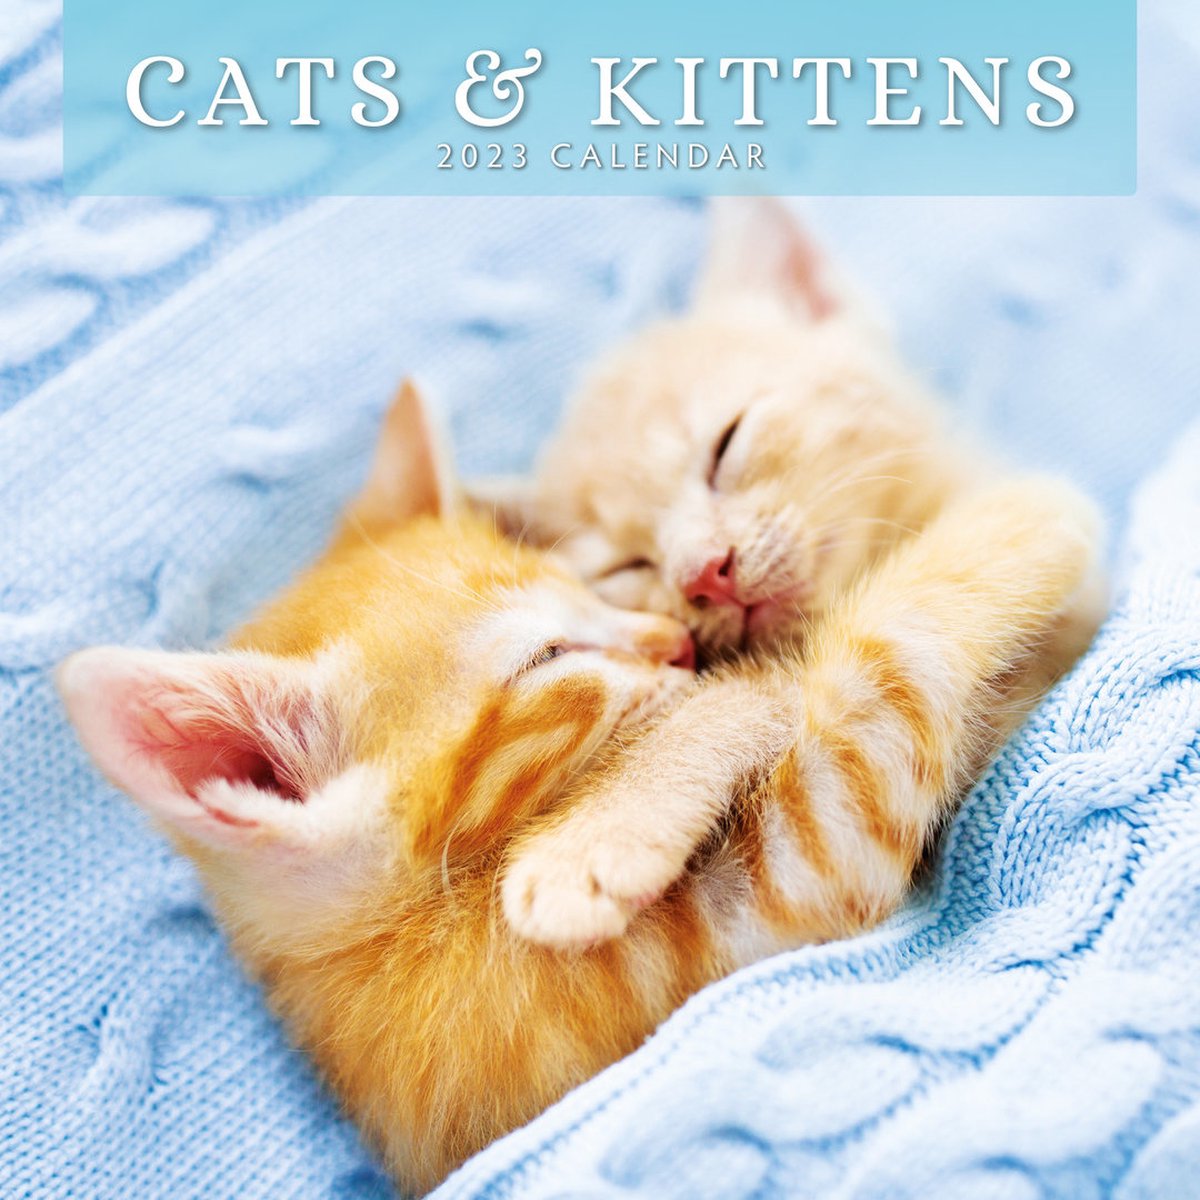 Cats and Kittens Kalender 2023